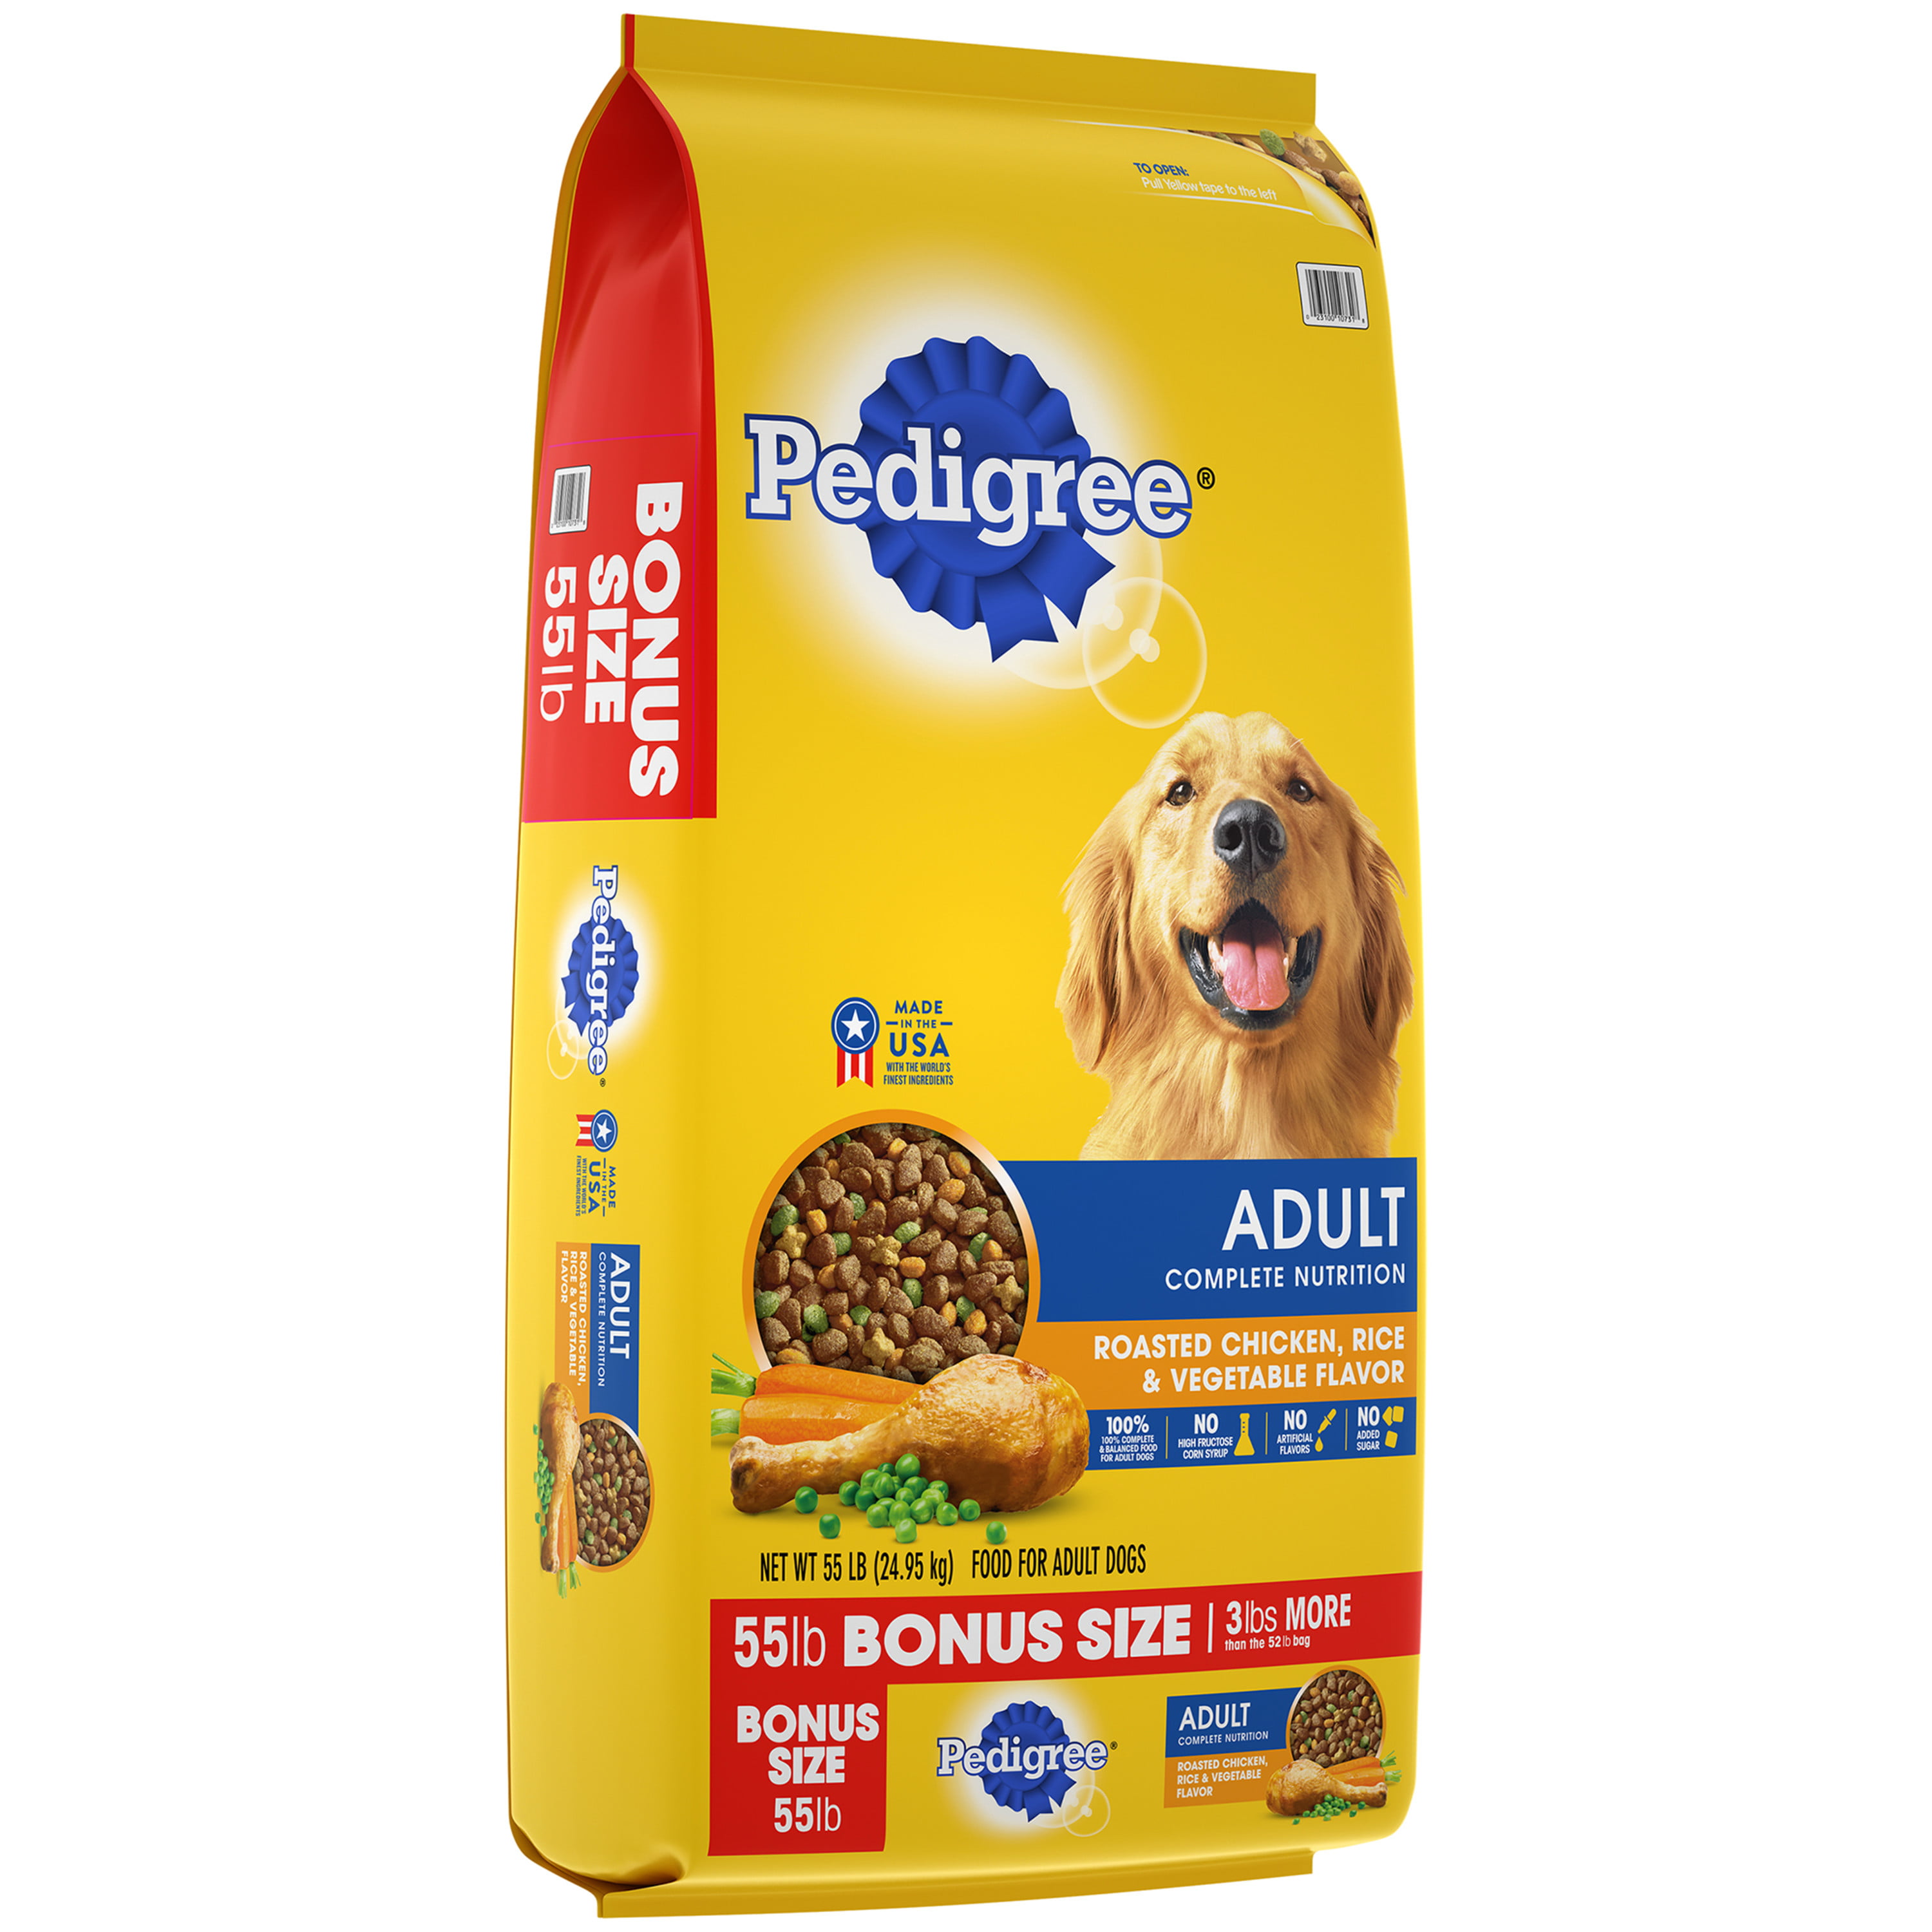 30 lb. Bag, Pedigree Puppy Growth & Protection Dry Dog Food Chicken &  Vegetable | eBay